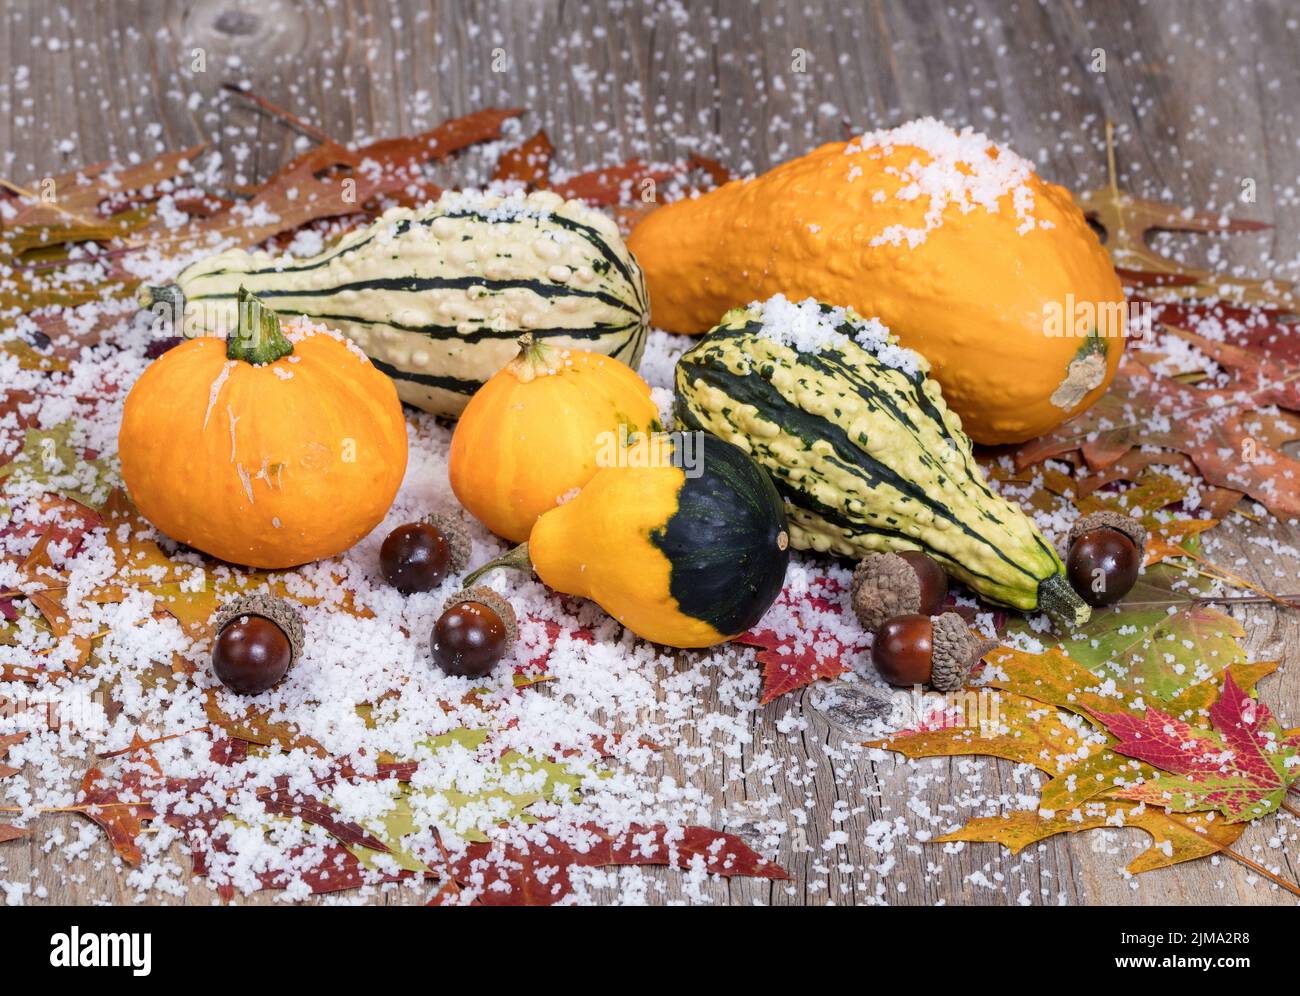 Seasonal autumn gourds plus leaves and acorn decorations covered with snow on rustic wooden boards Stock Photo